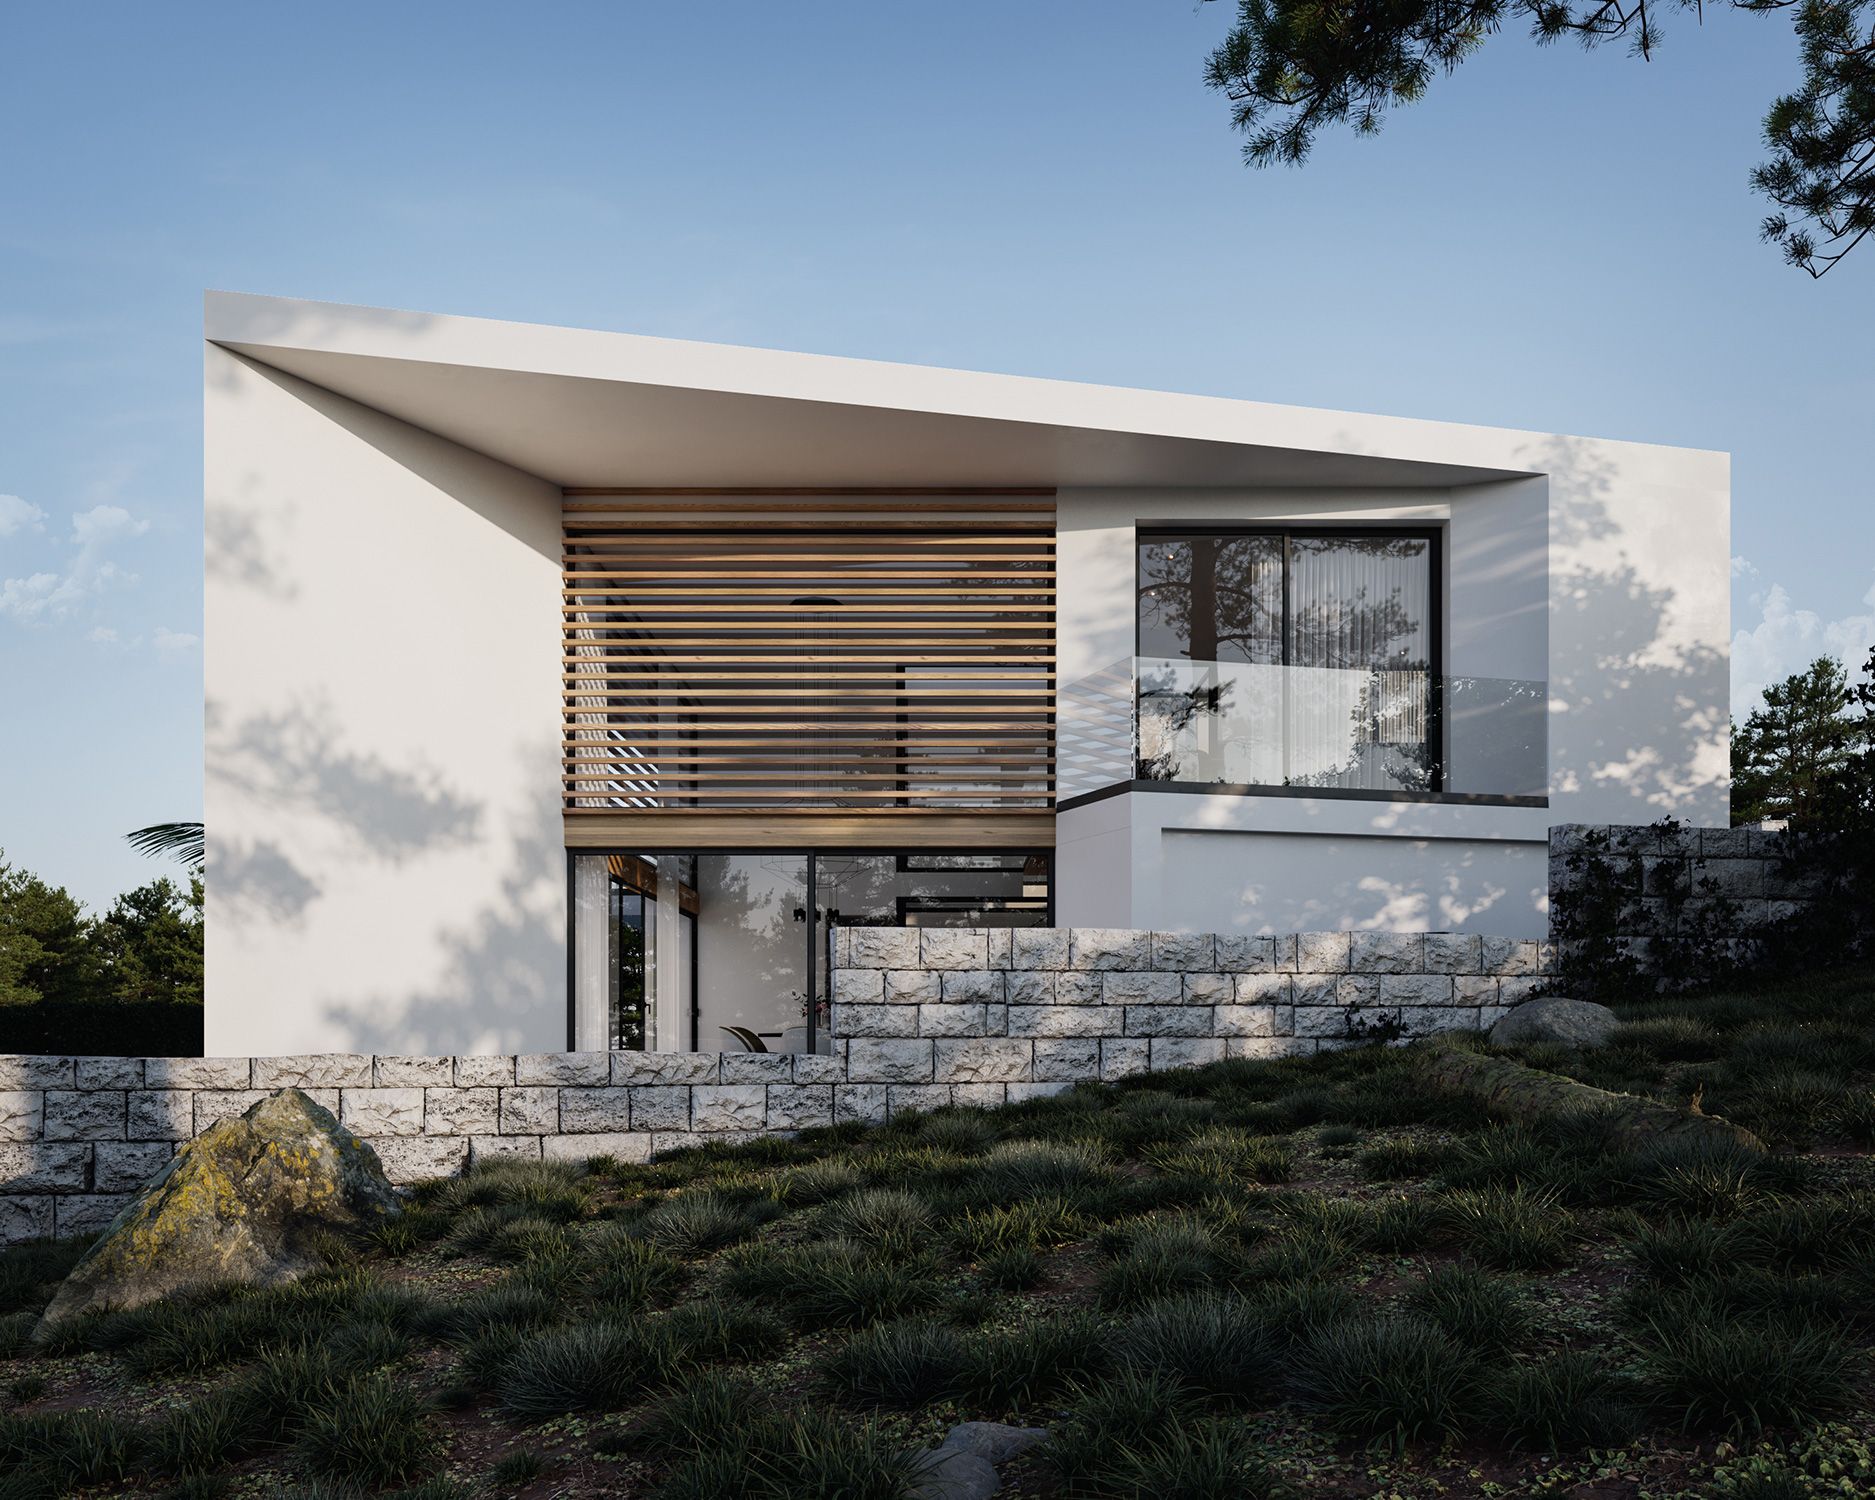 Aljezur - The house with the palm tree - Front entrance | GDA-V Architectural Visualization